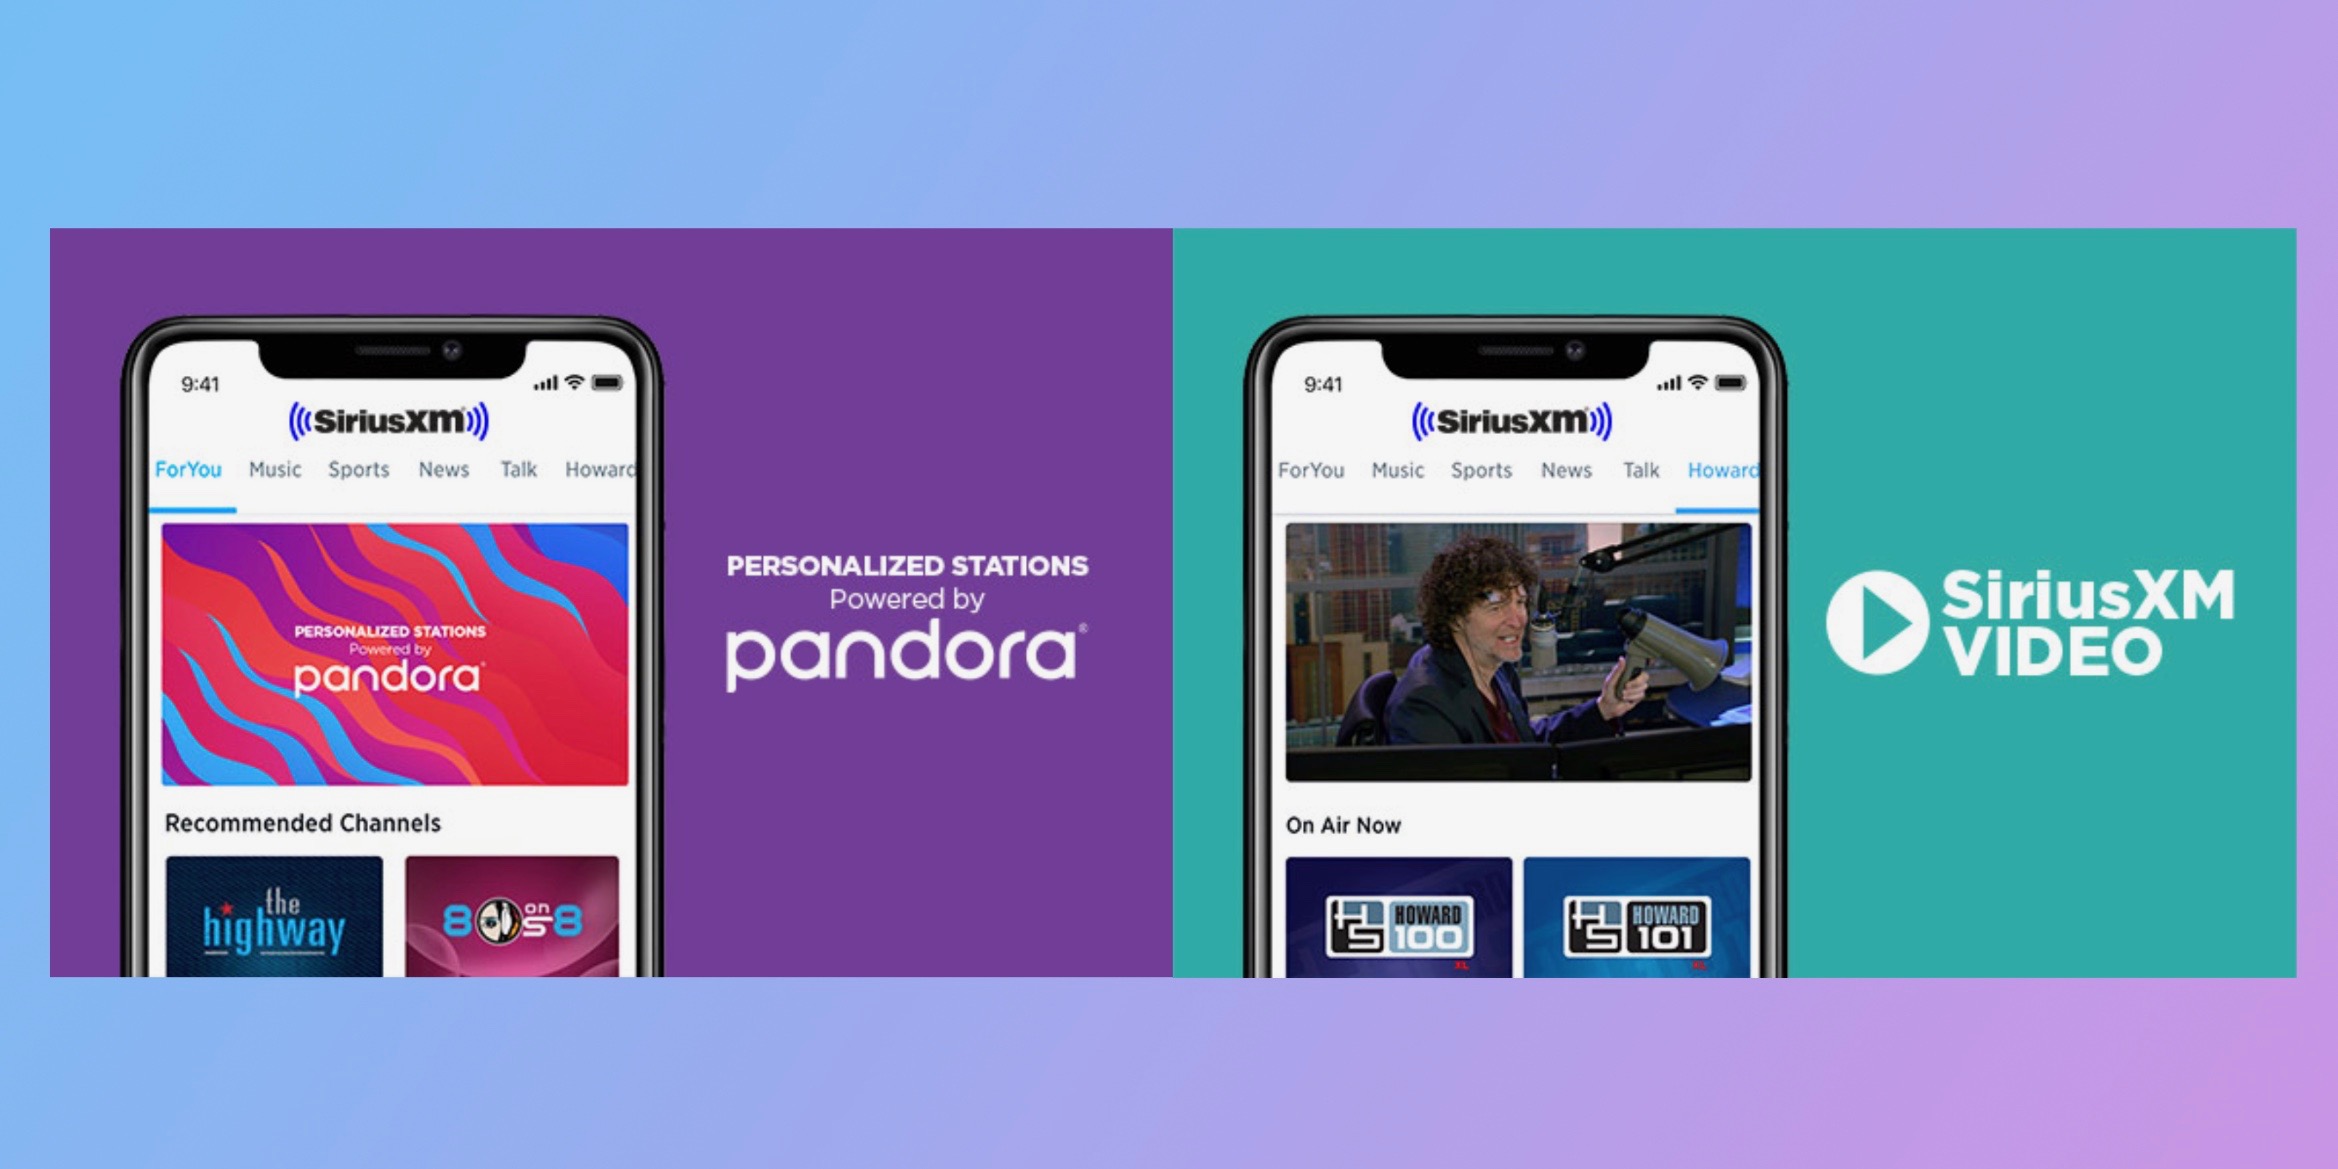 tendens svovl Anemone fisk SiriusXM update brings personalized Pandora-powered stations, exclusive  videos, and expanded streaming plan - 9to5Mac